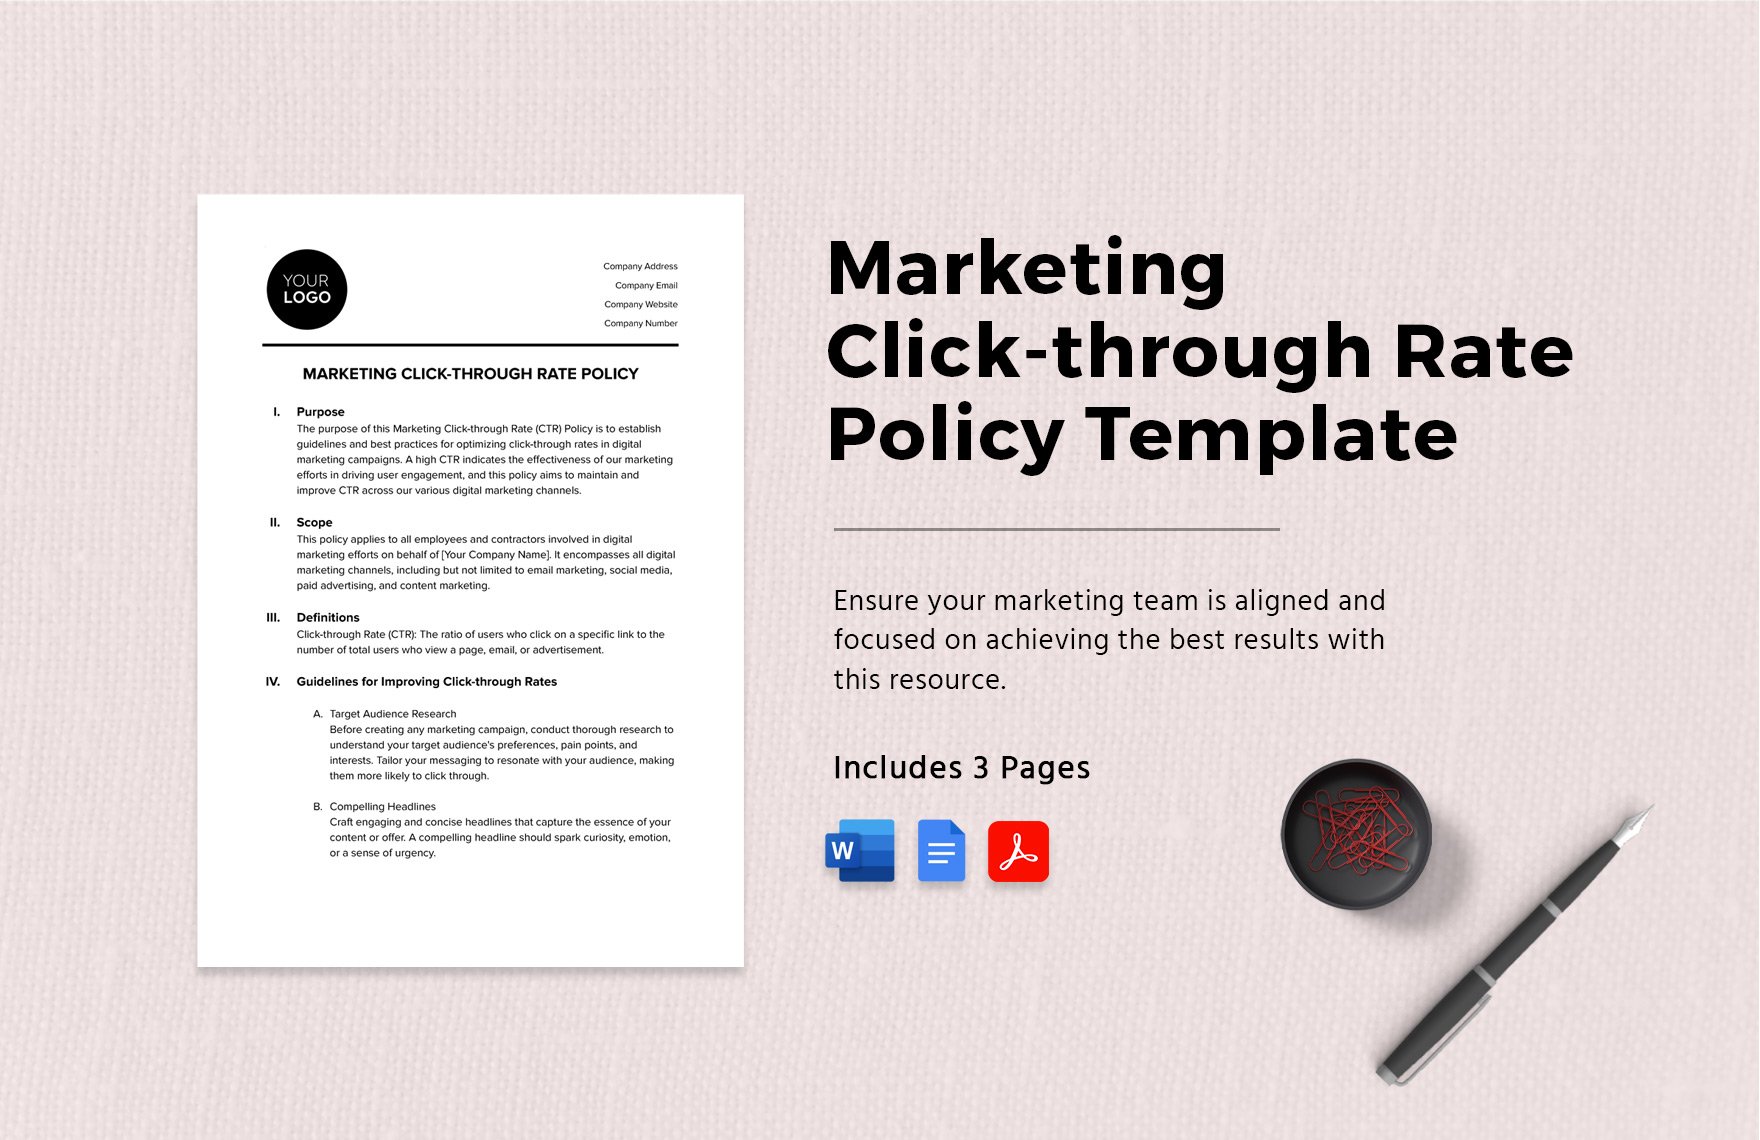 Marketing Click-through Rate Policy Template 